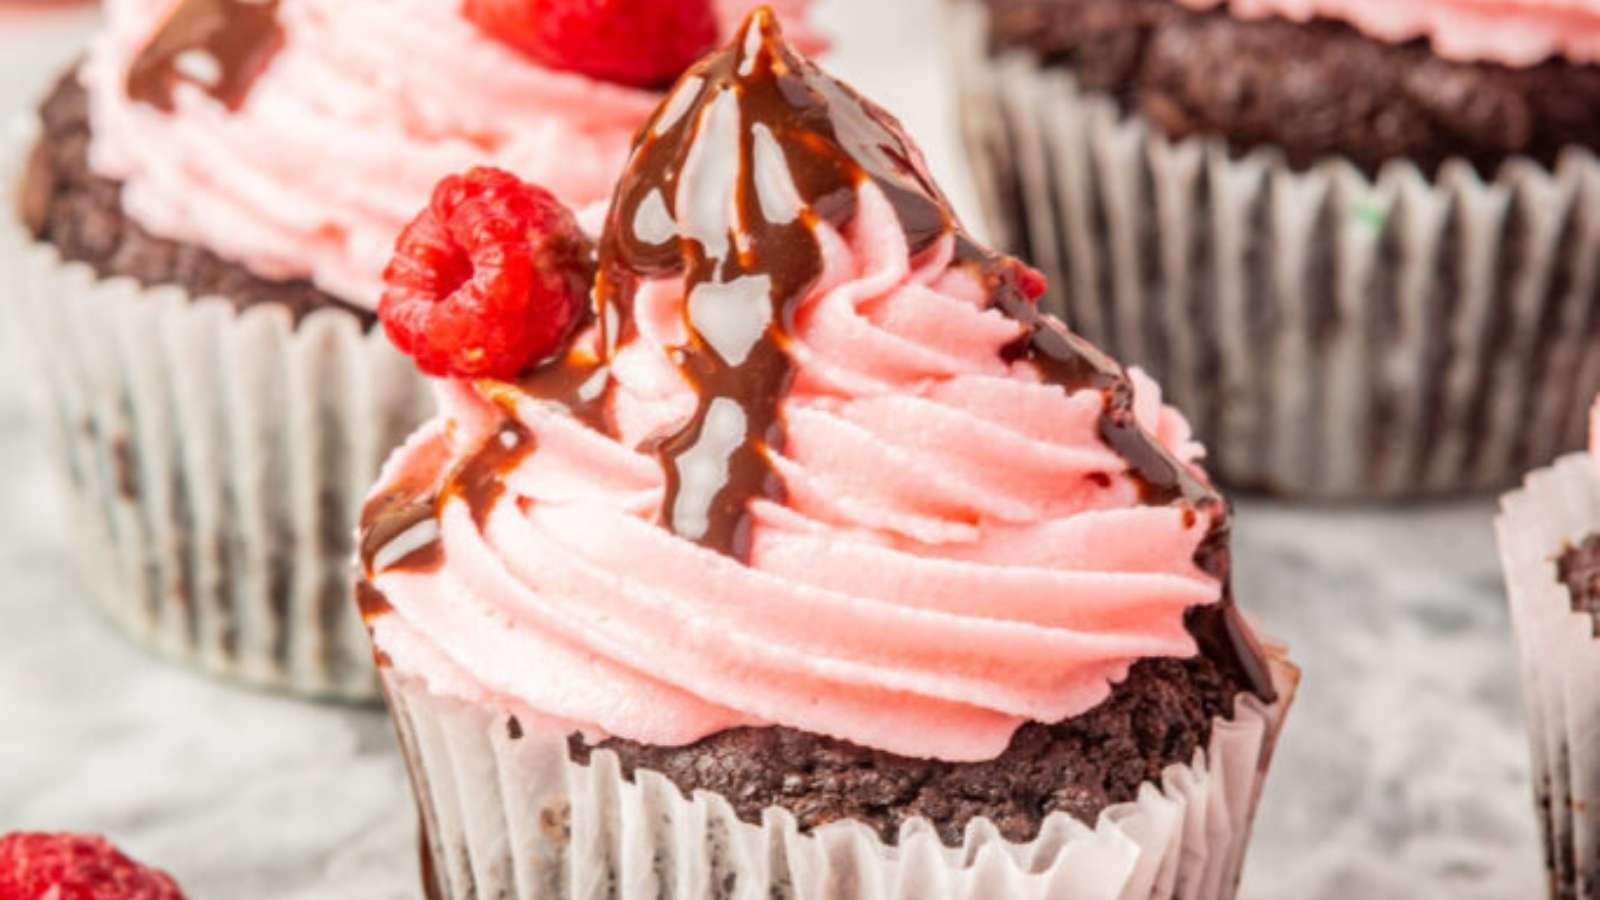 Chocolate cupcakes with raspberries and chocolate icing.